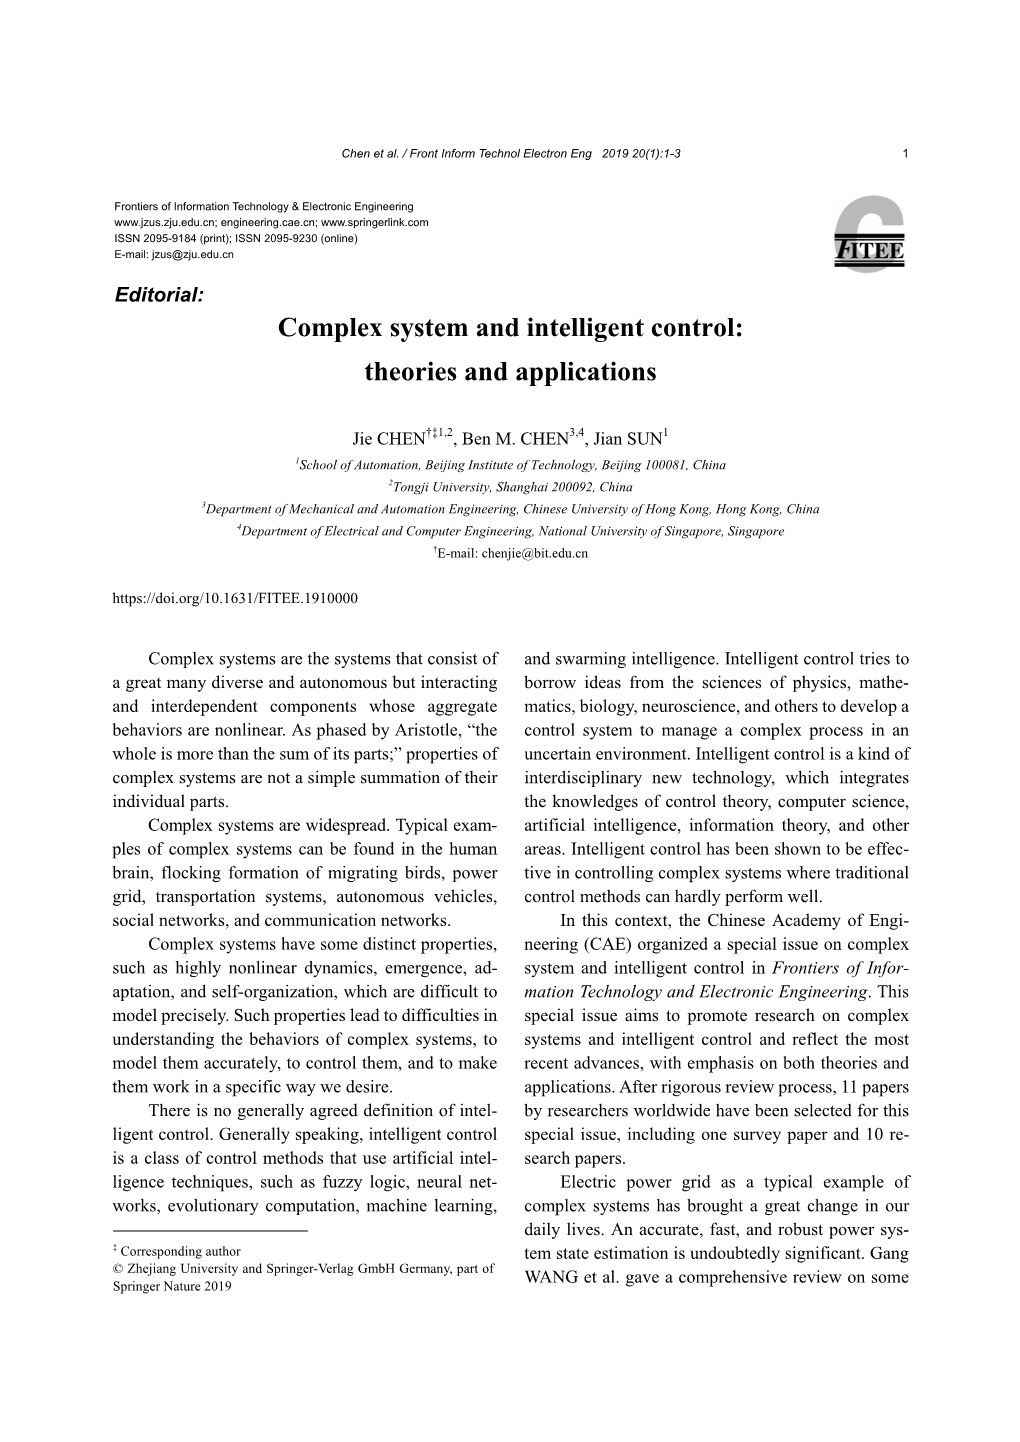 Complex System and Intelligent Control: Theories and Applications